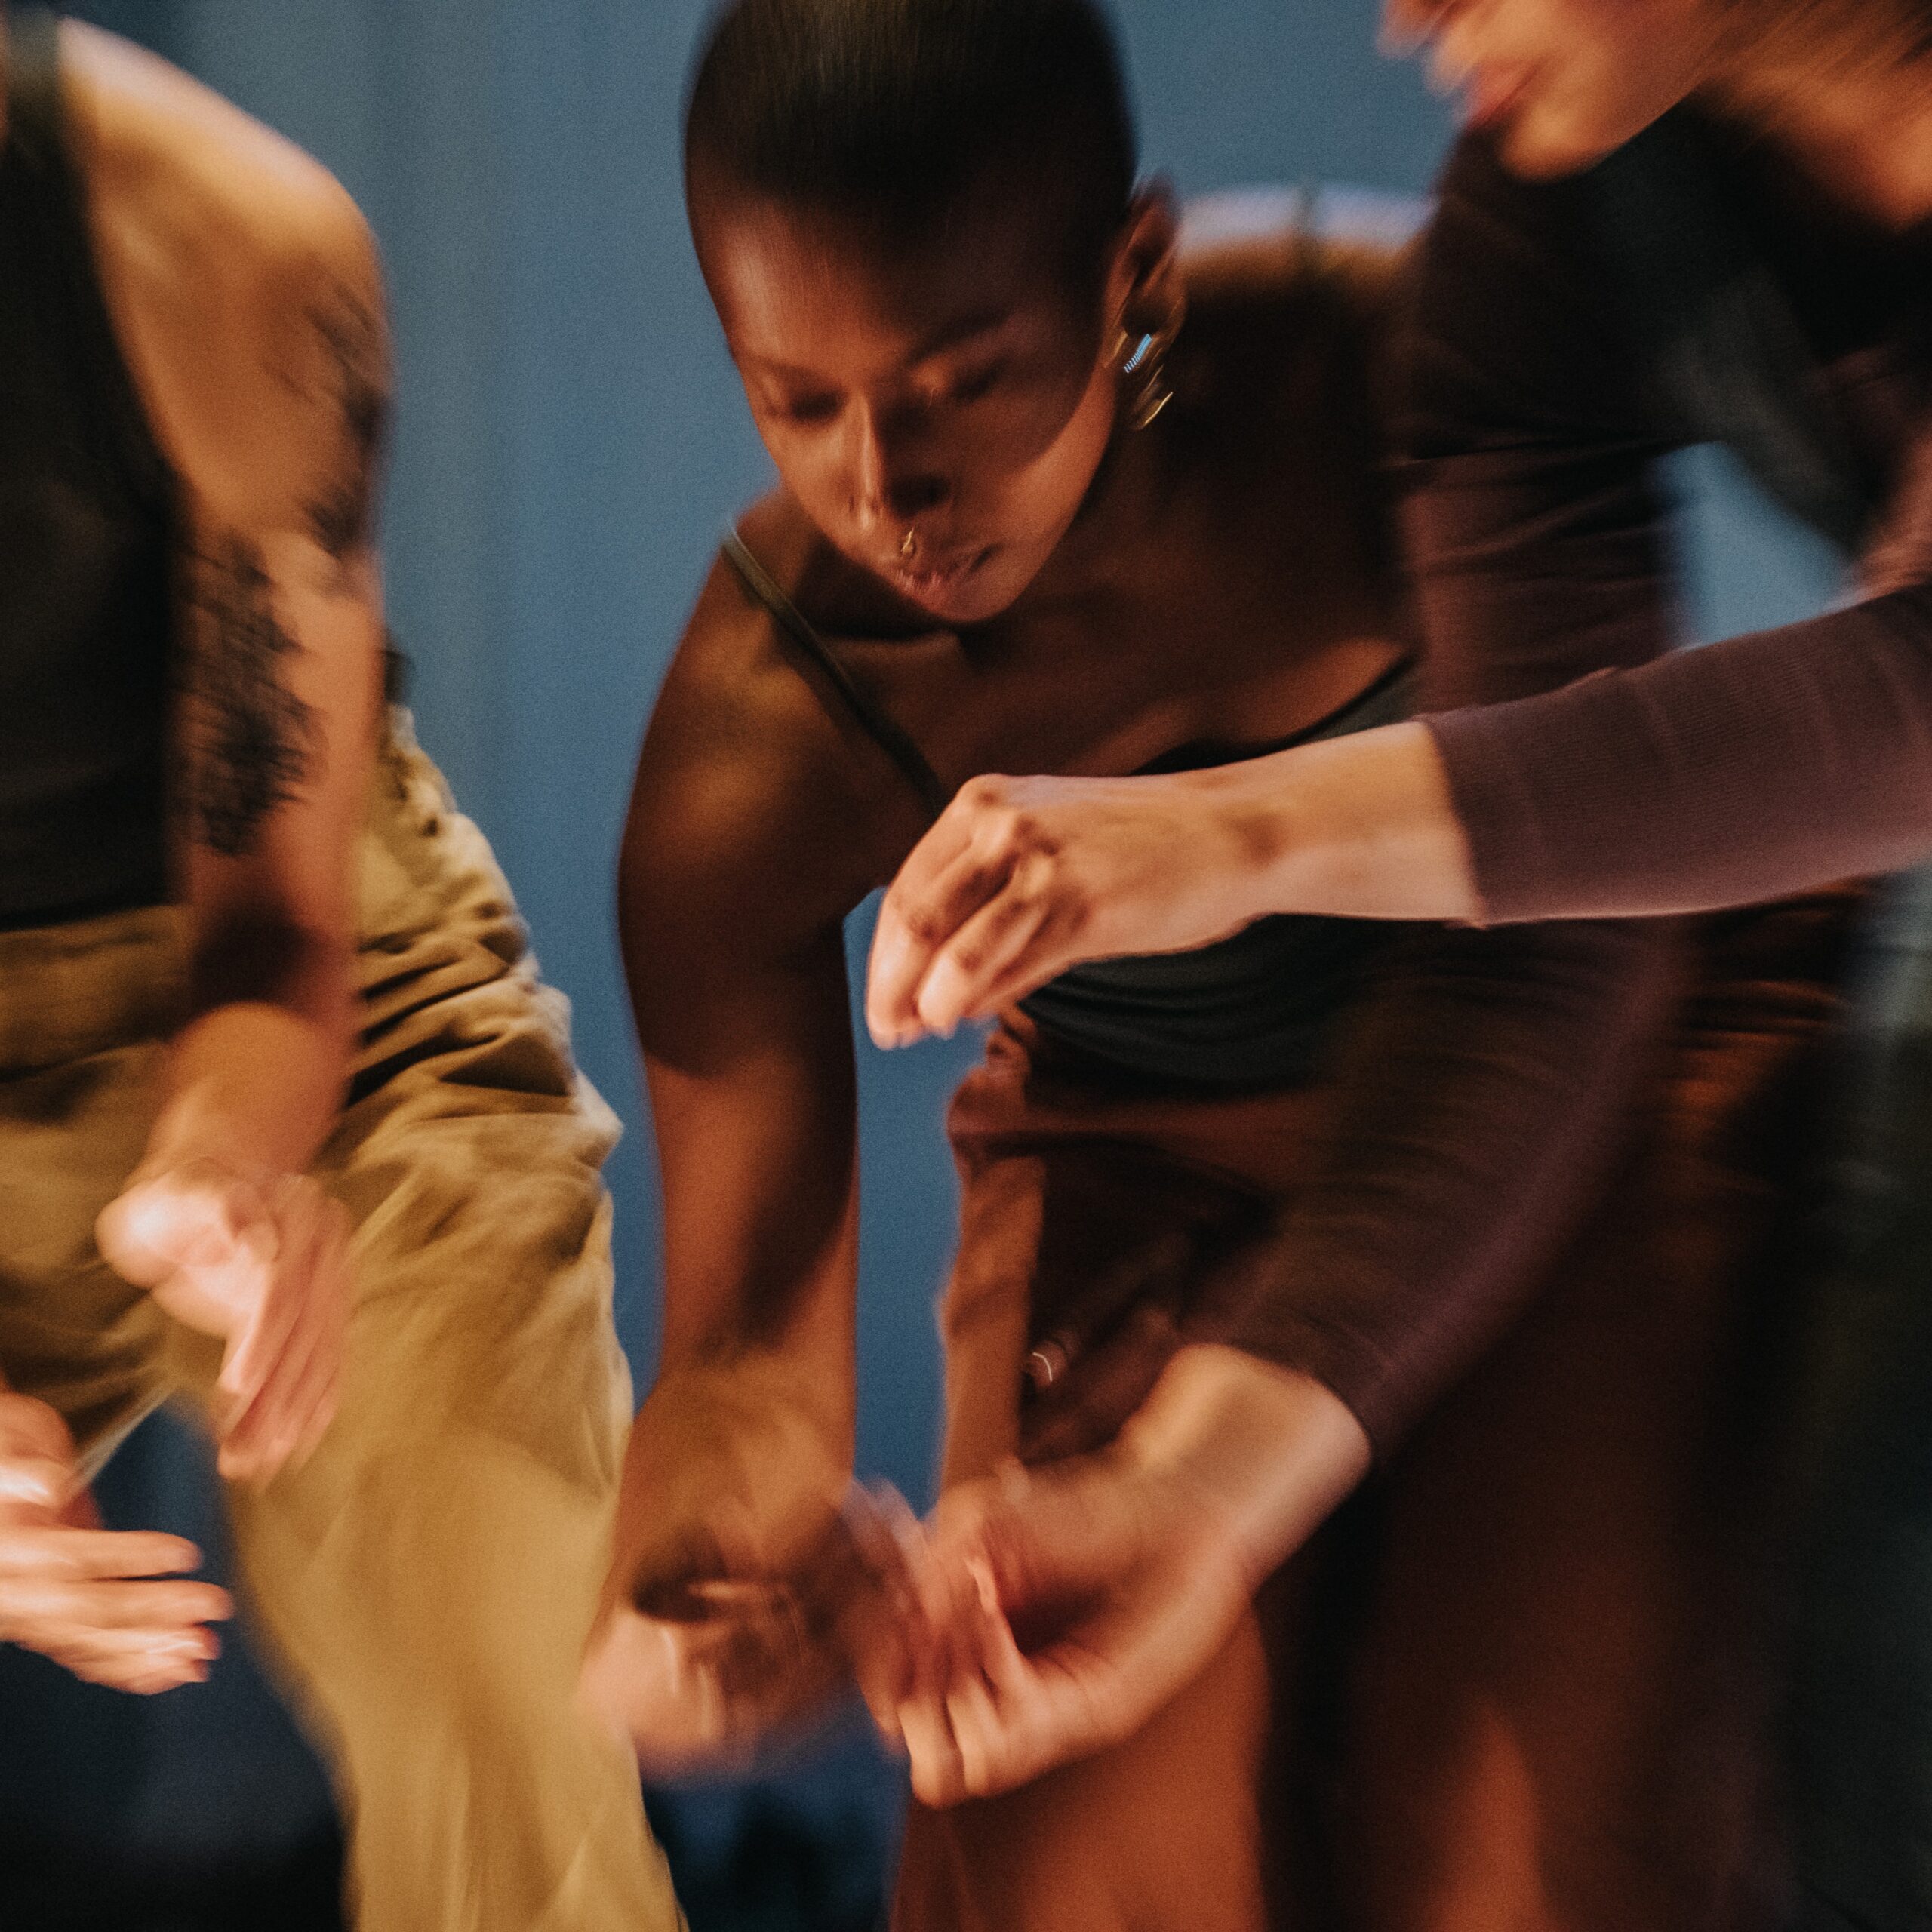 Three dancers wearing different shades of brown bend their upper bodies and bring their hands together.